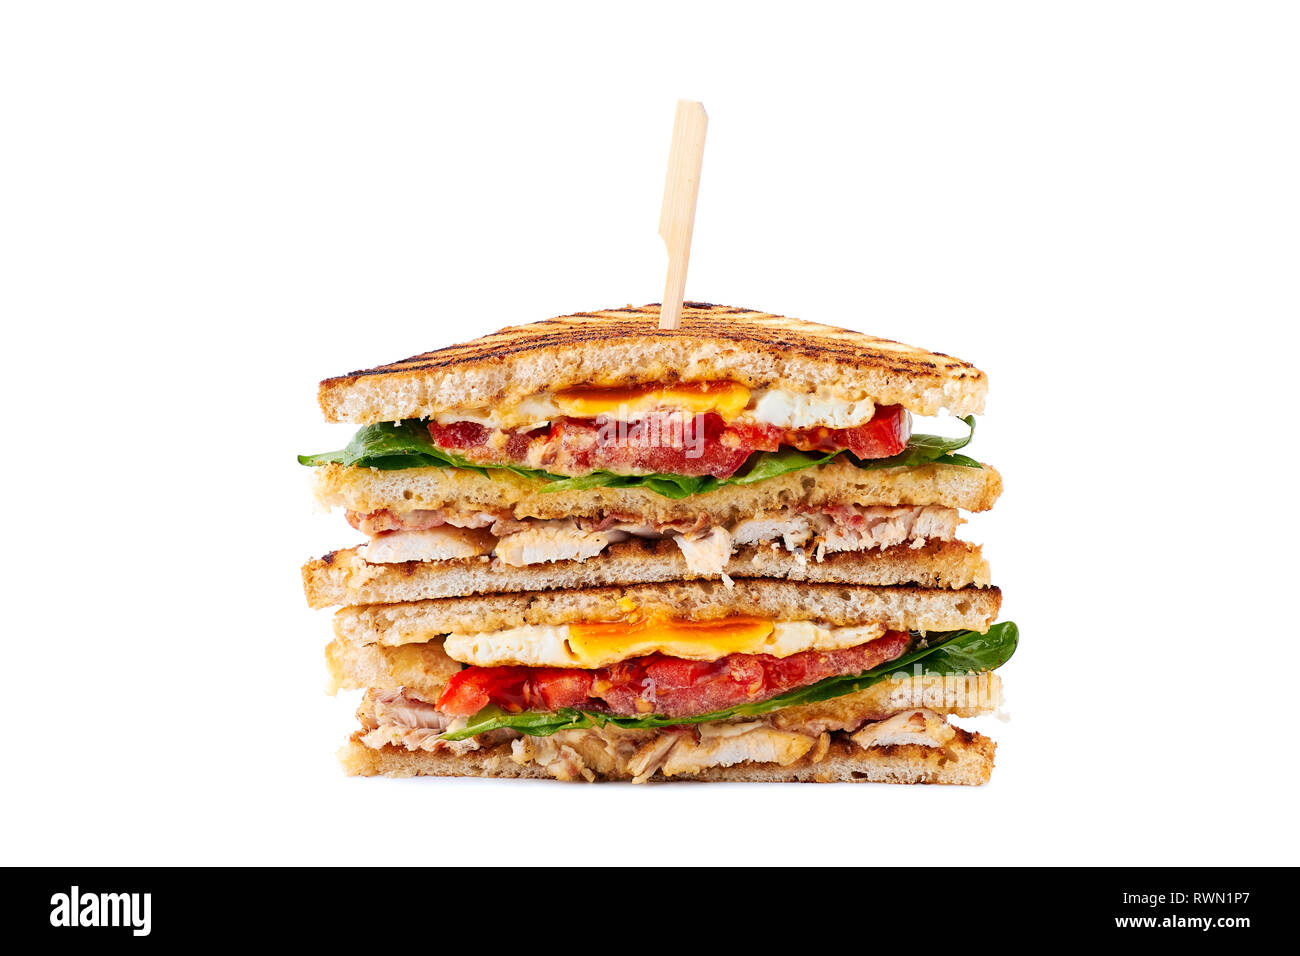 Huge juicy club sandwich with chicken and fried egg on white Stock Photo